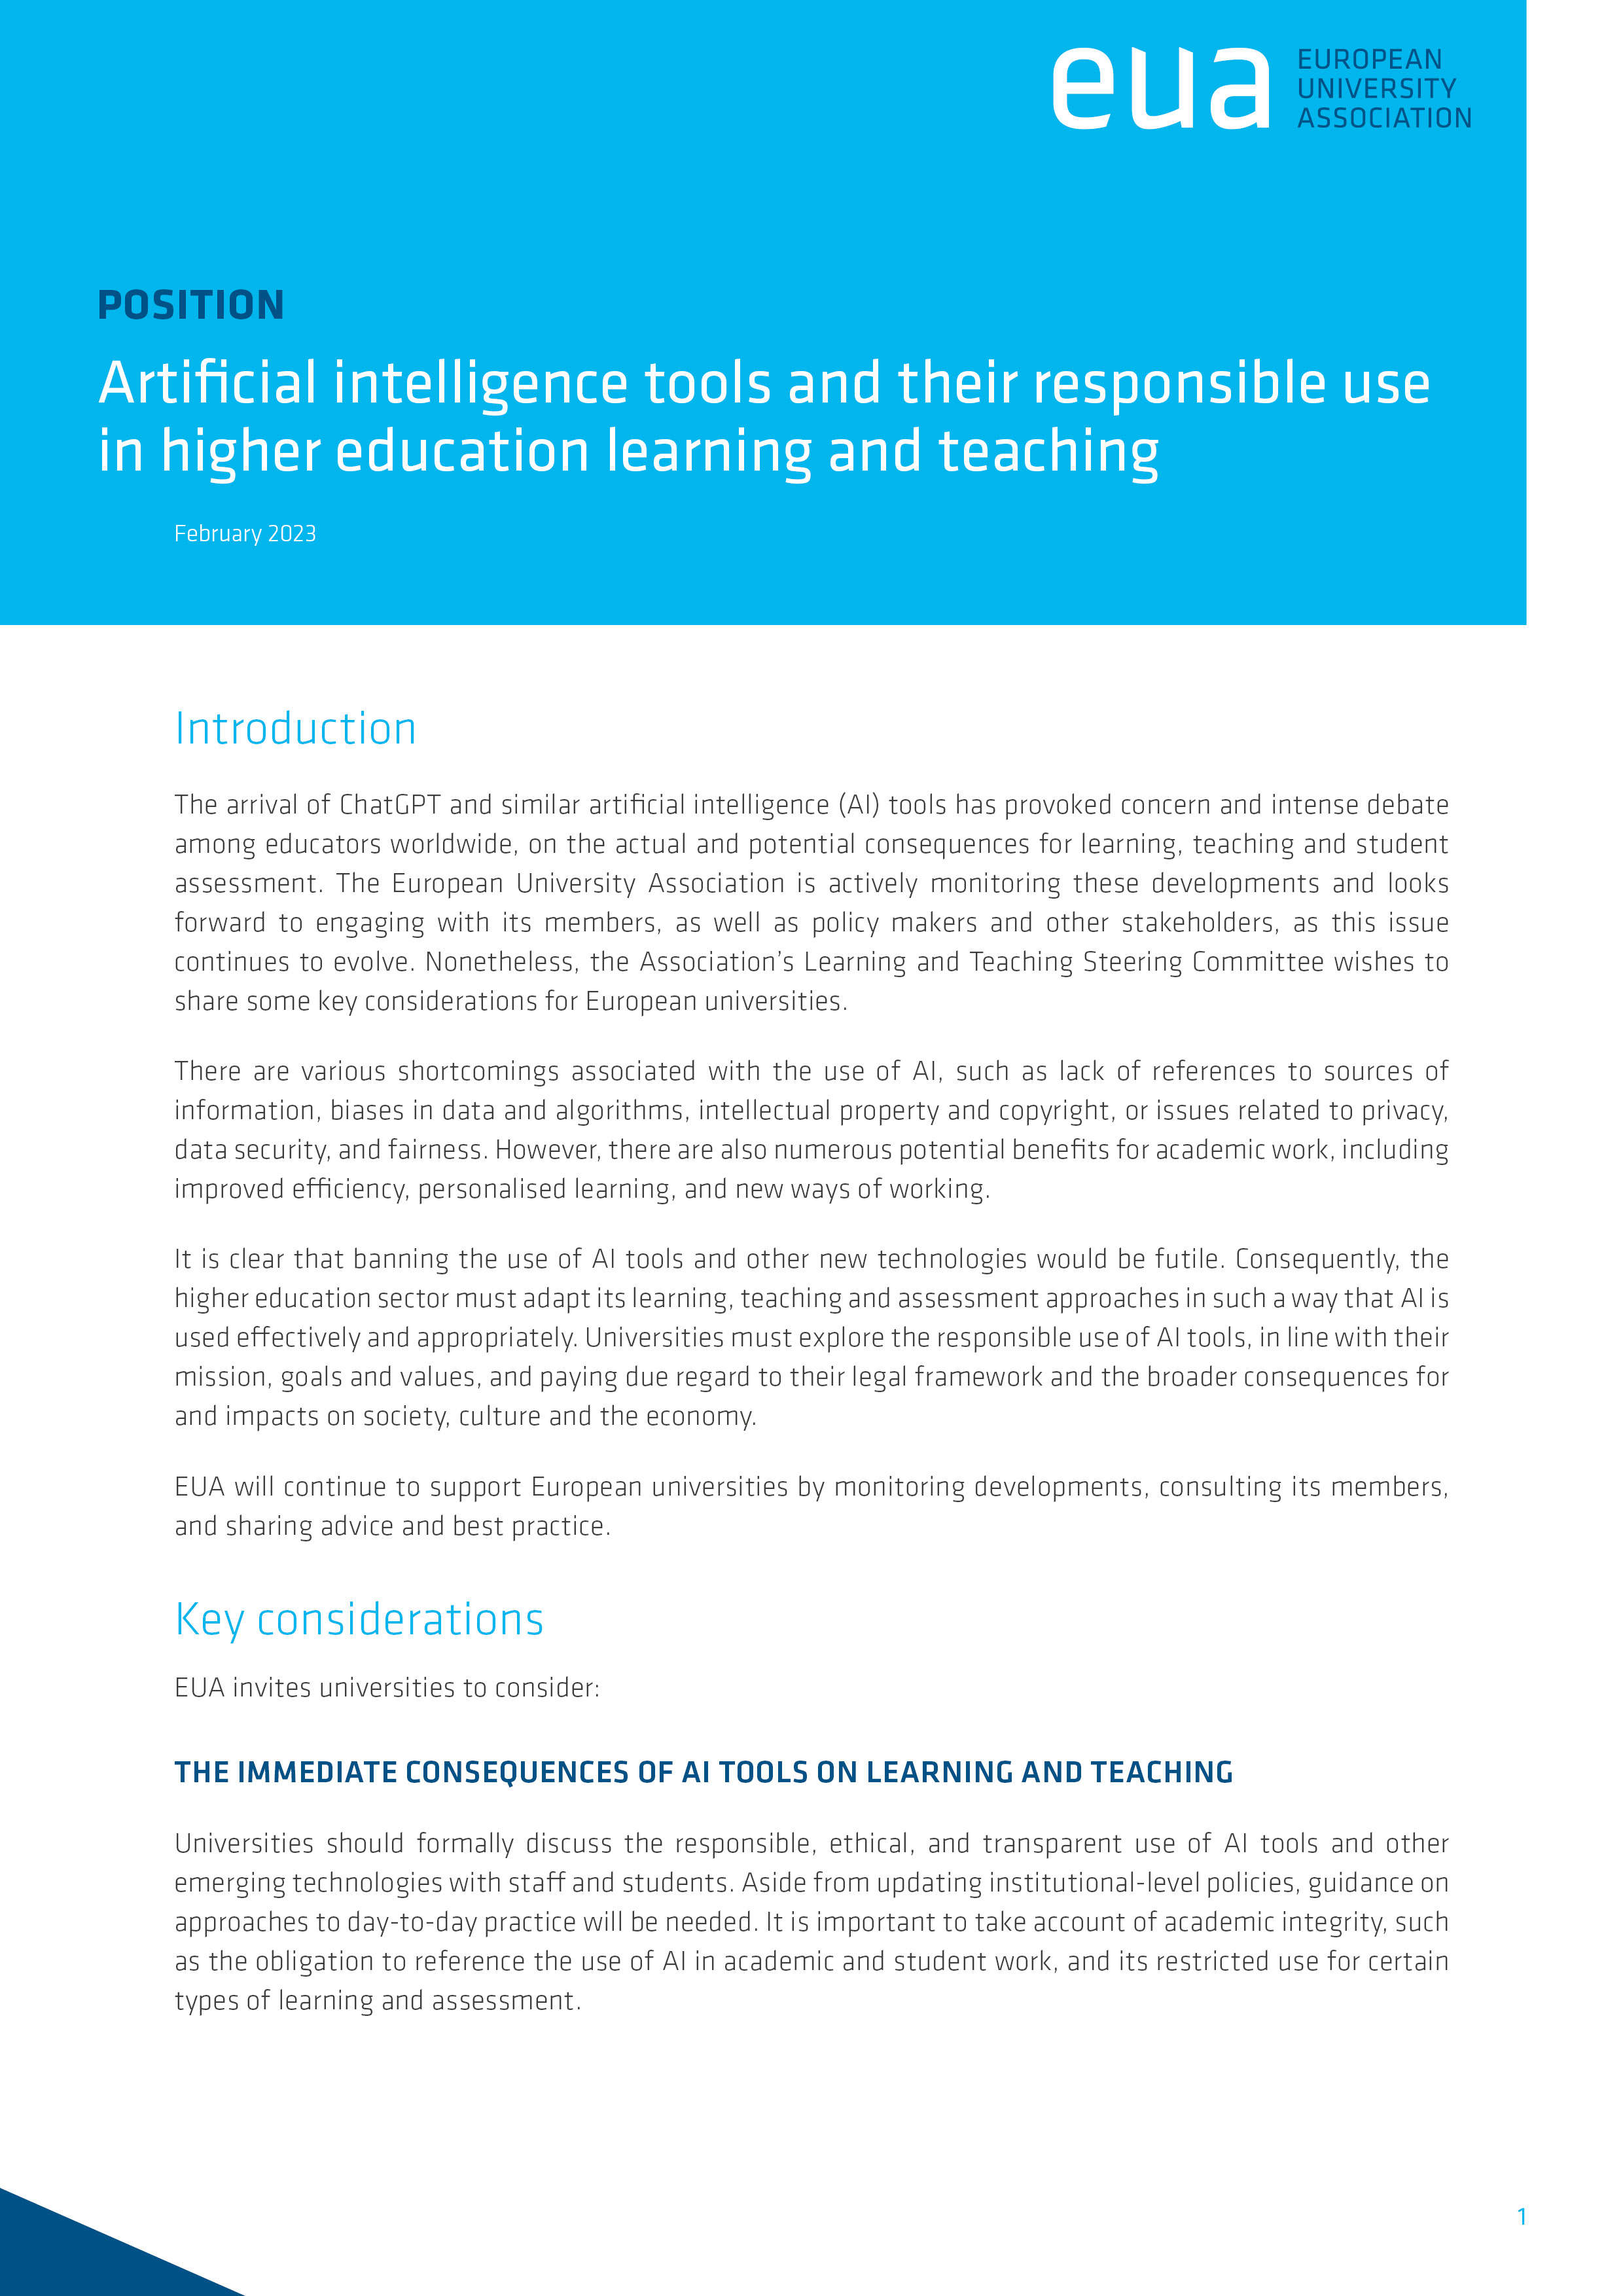 Artificial intelligence tools and their responsible use in higher education learning and teaching